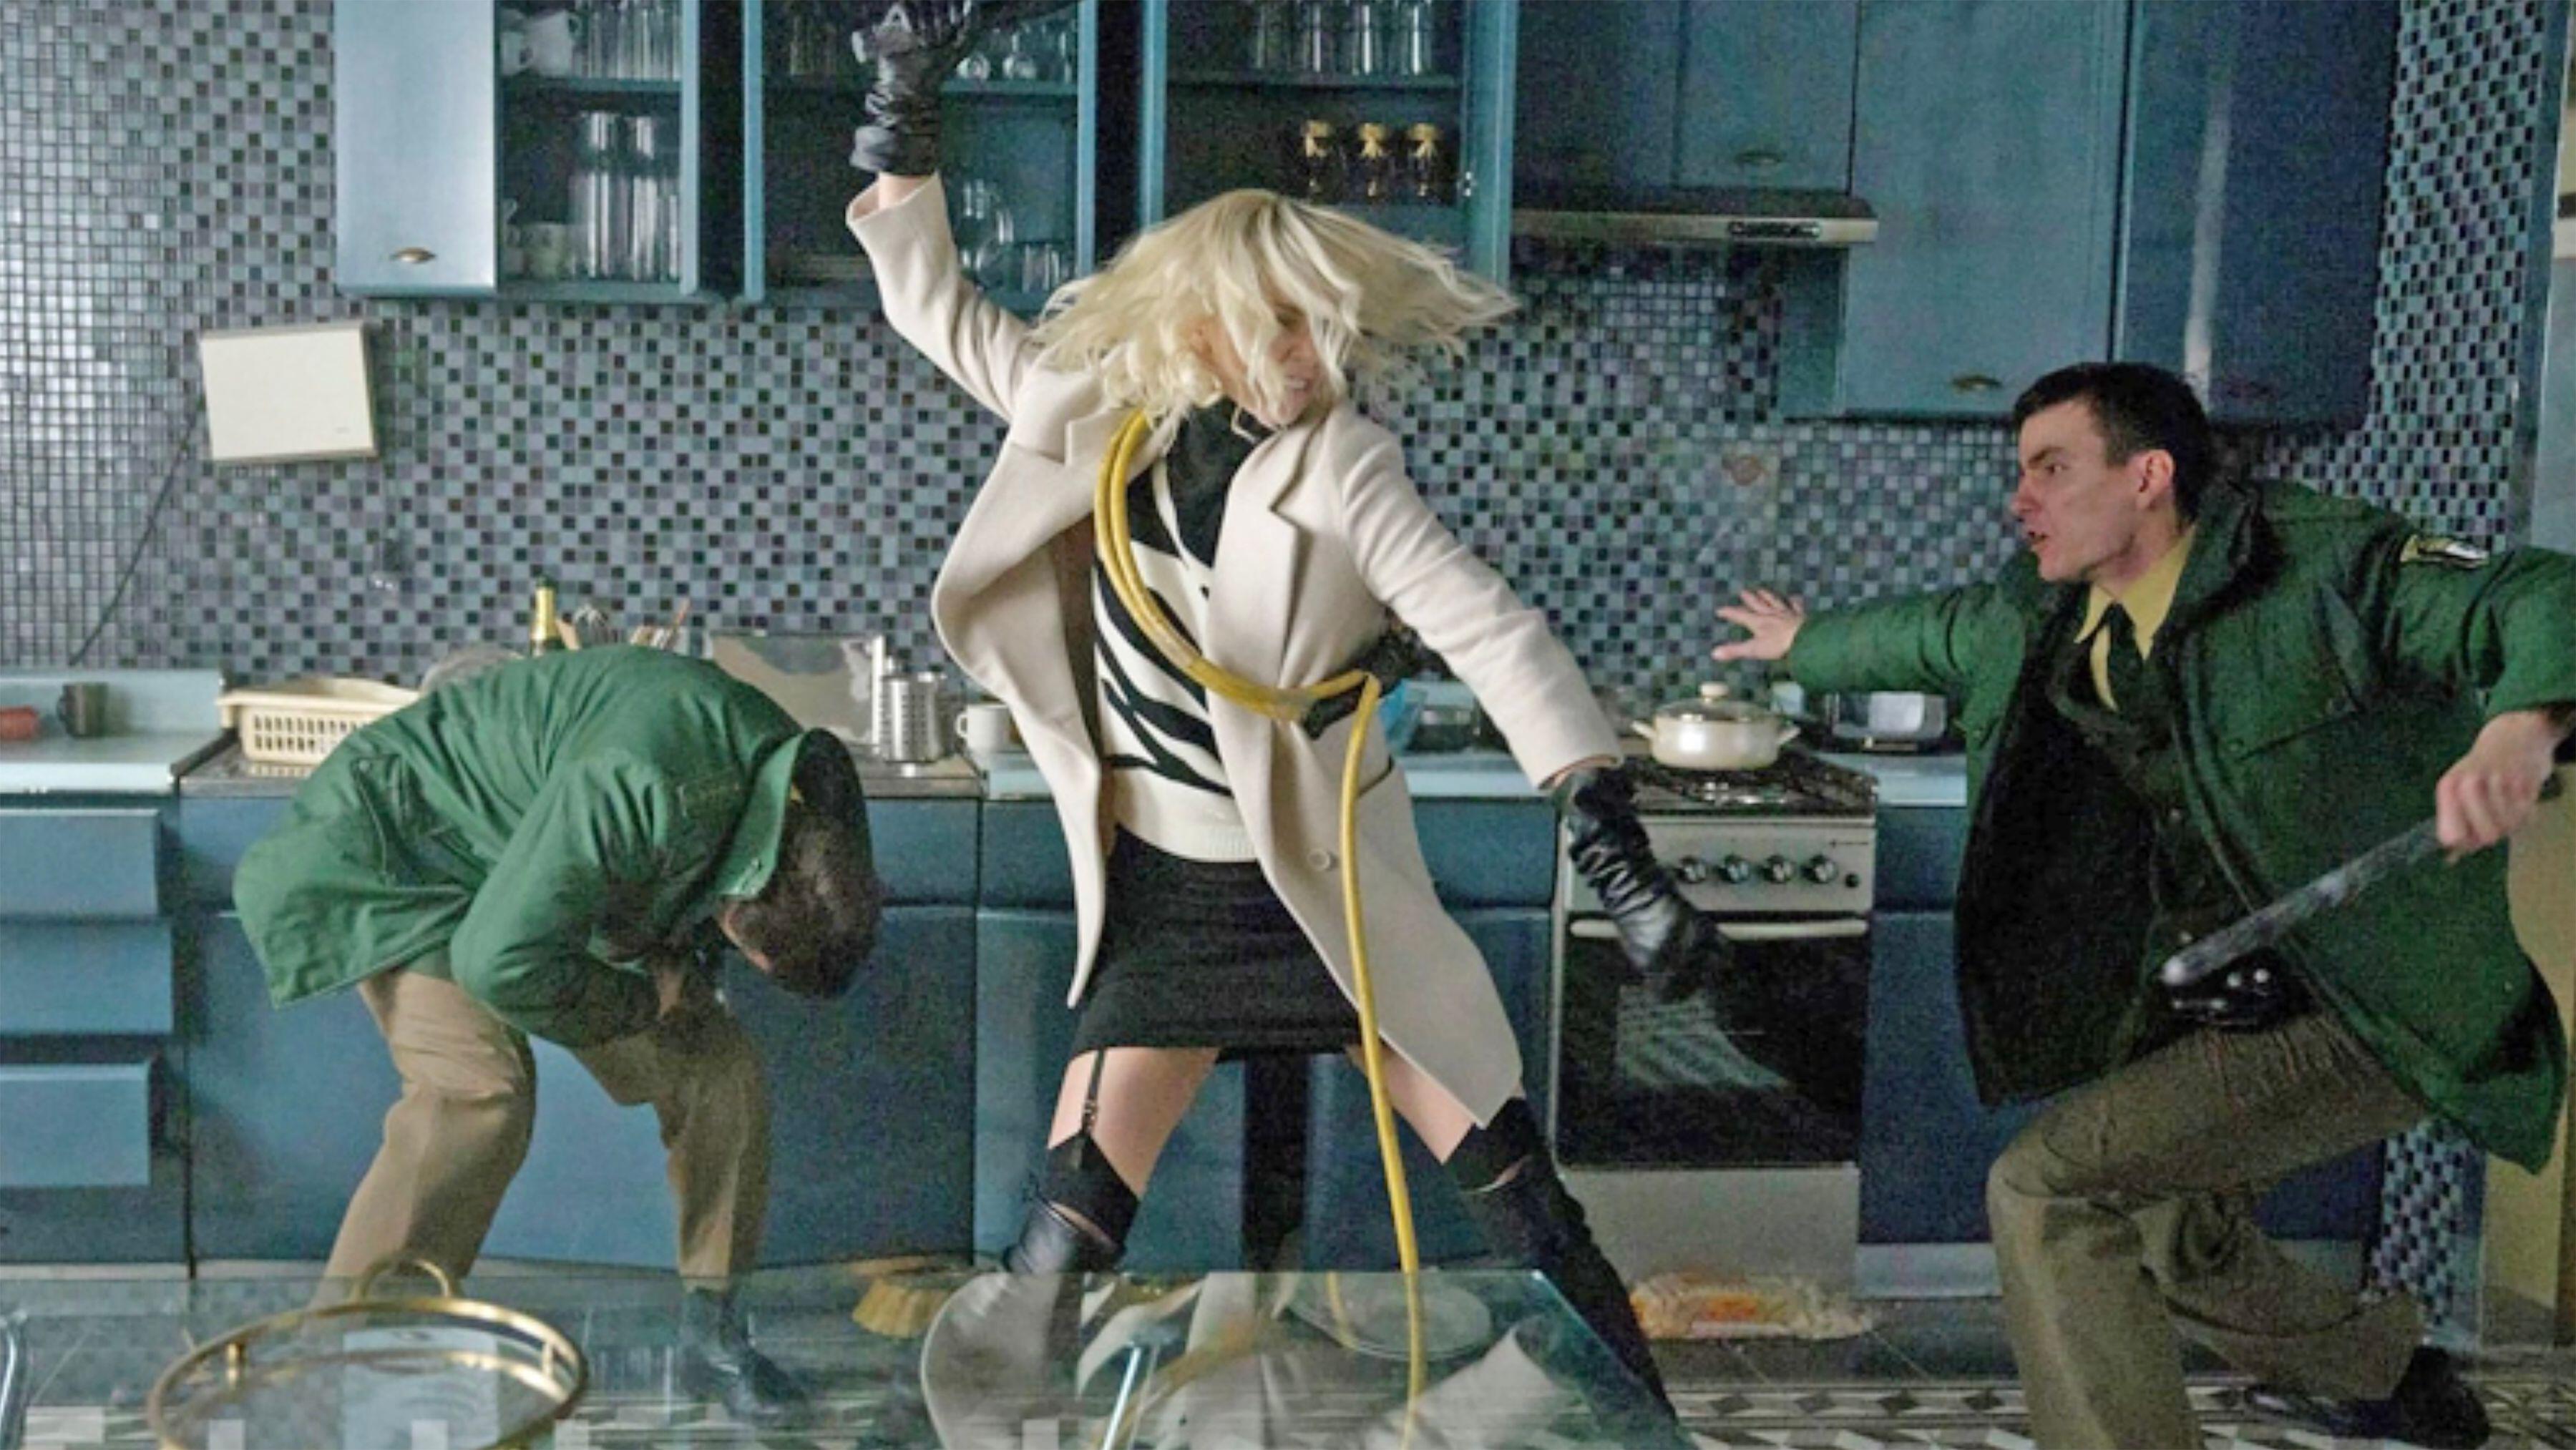 Charlize Theron as Lorraine Broughton fighting men in front of and behind her in Atomic Blonde